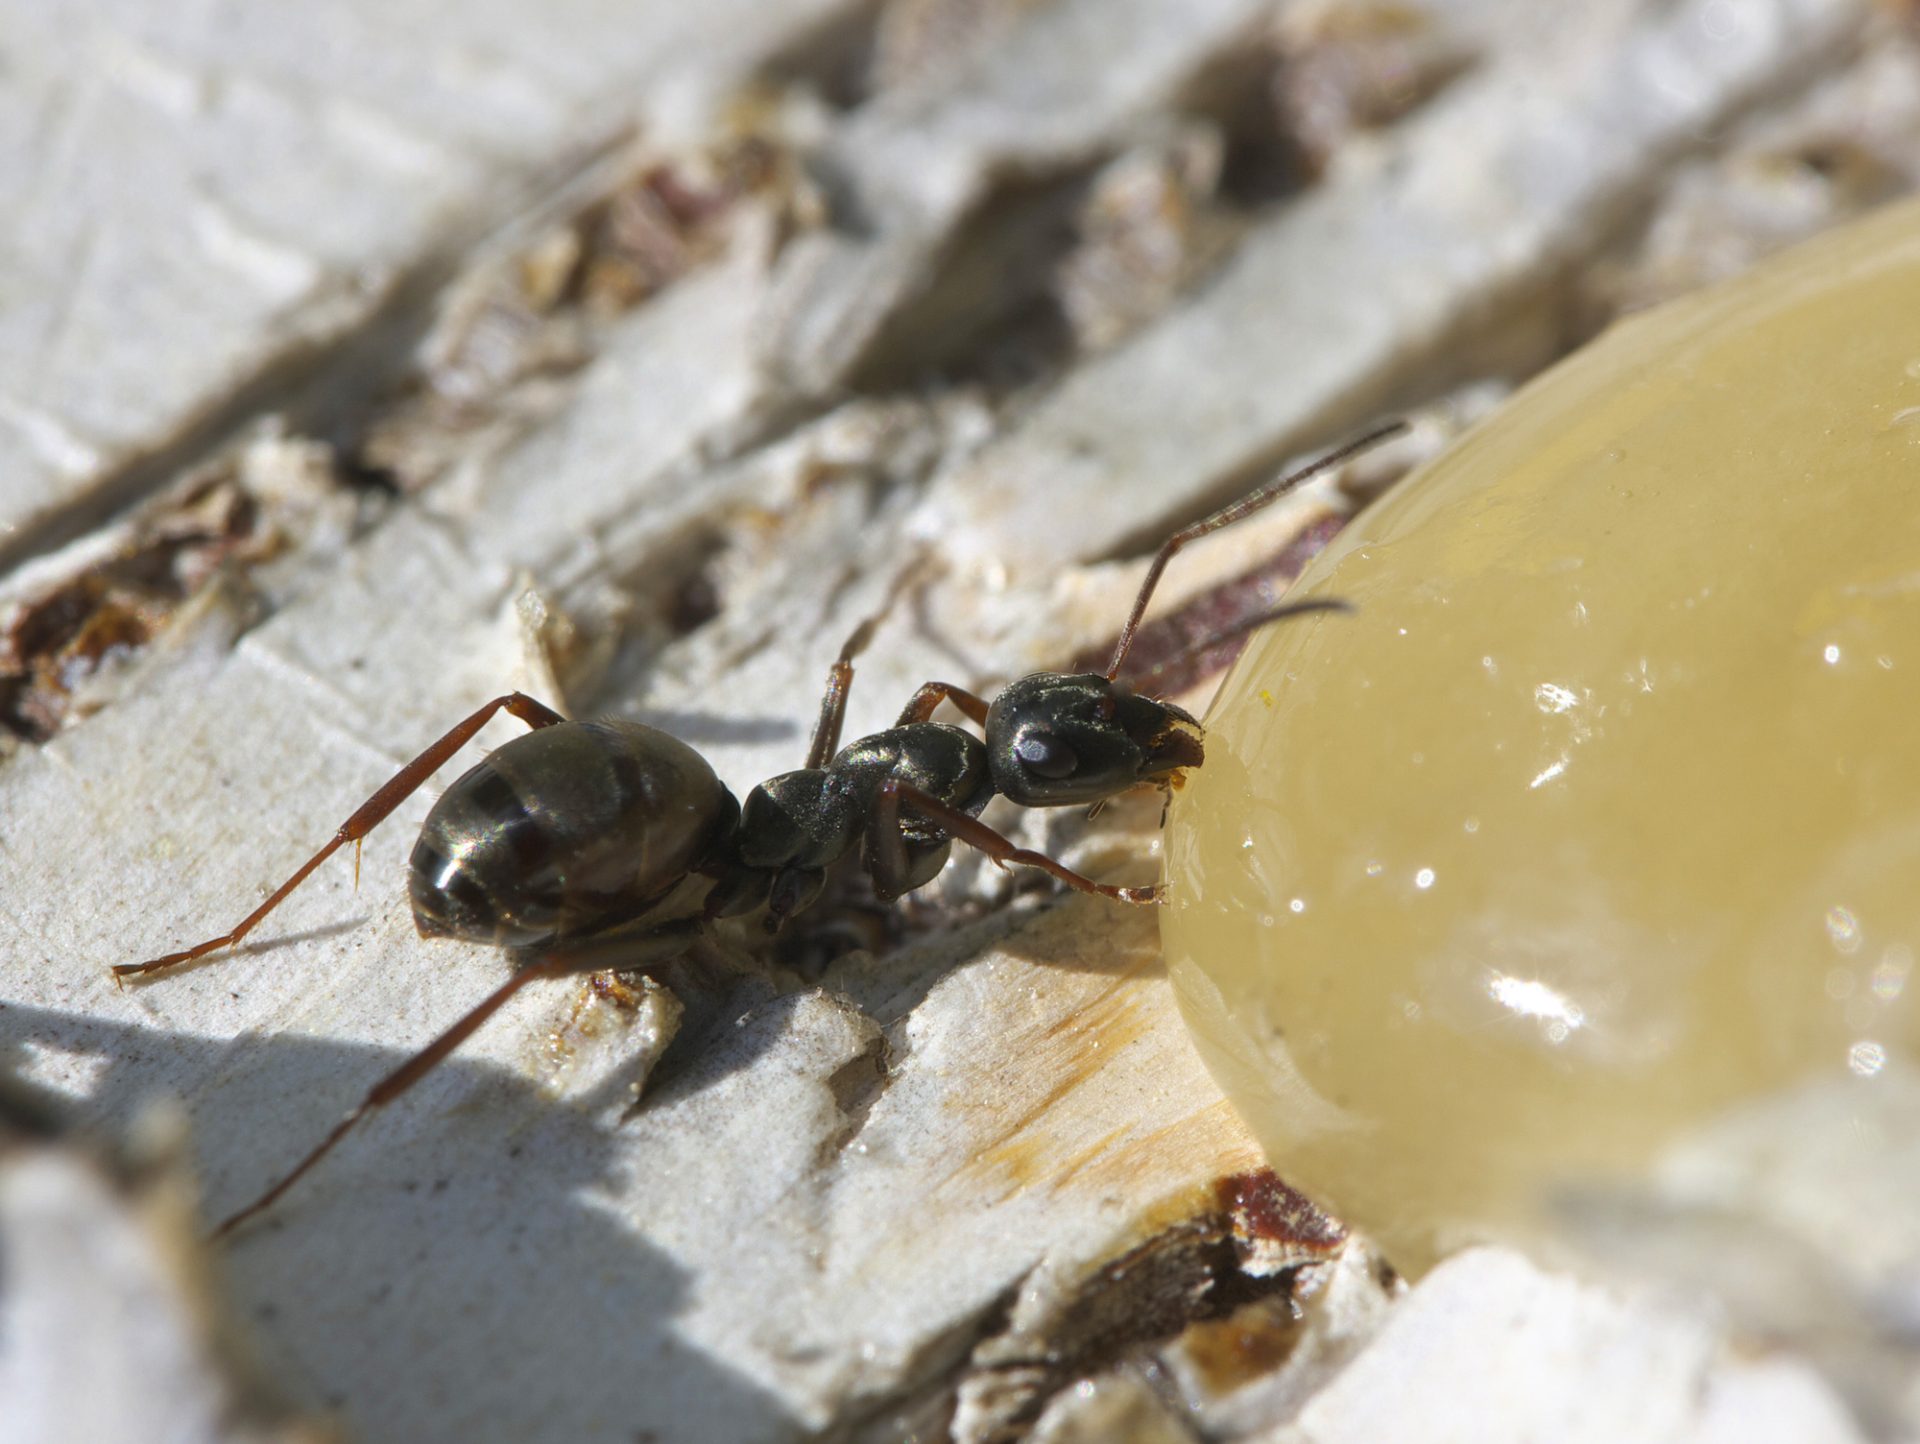 Protect Honey Bees from Ants - Ant eating honey